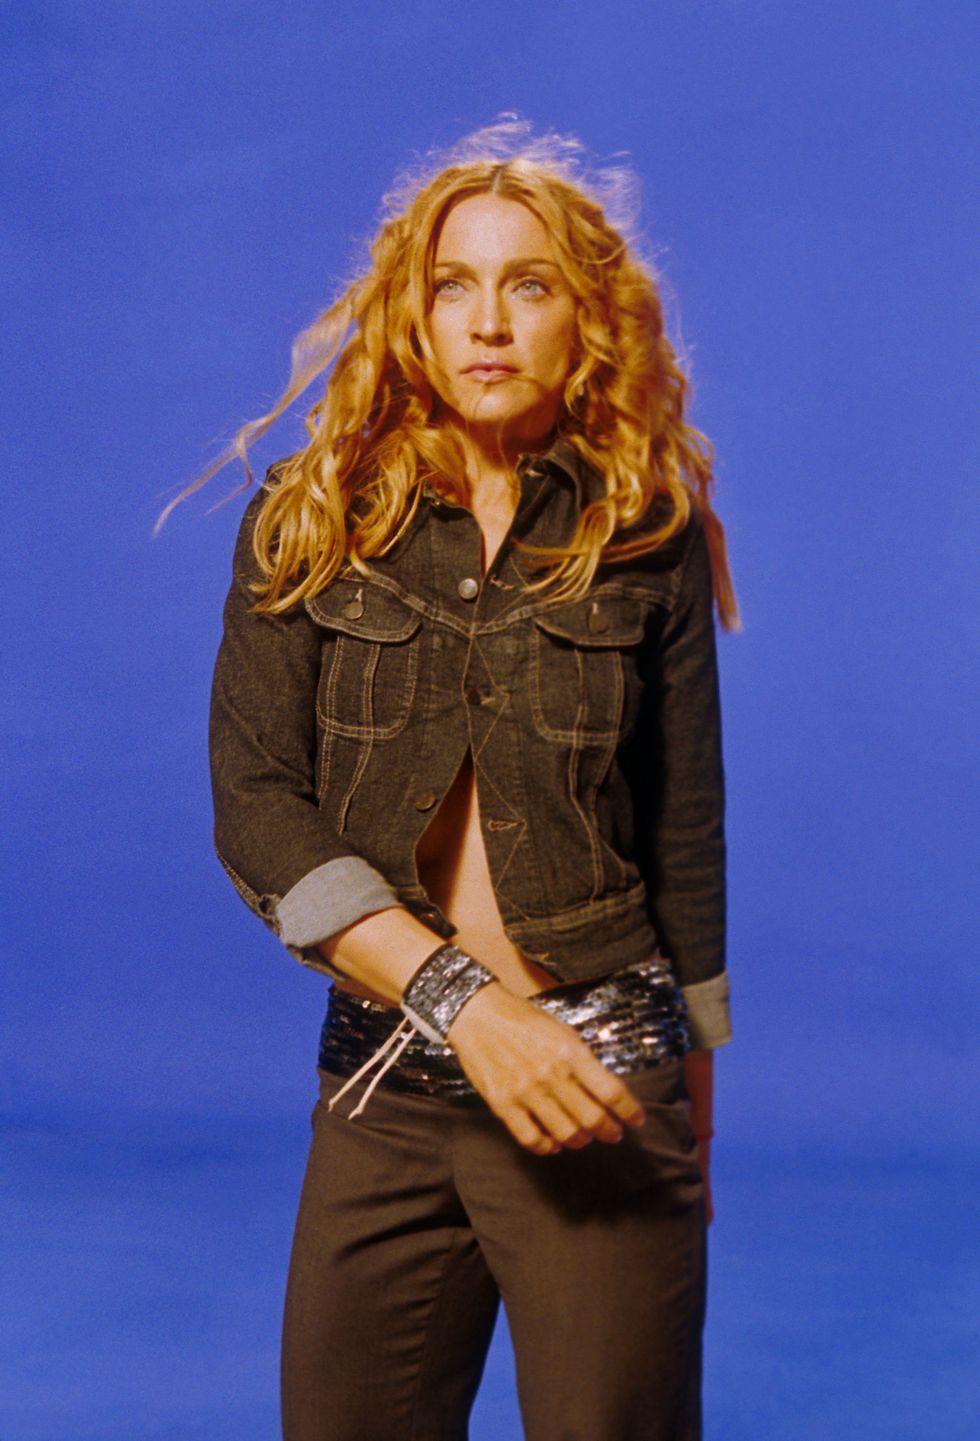 Madonna on the set of her 'Ray of Light' video. Photo by Frank Micelotta/ImageDirect. 1998*** SPECIAL RATES APPLY ***